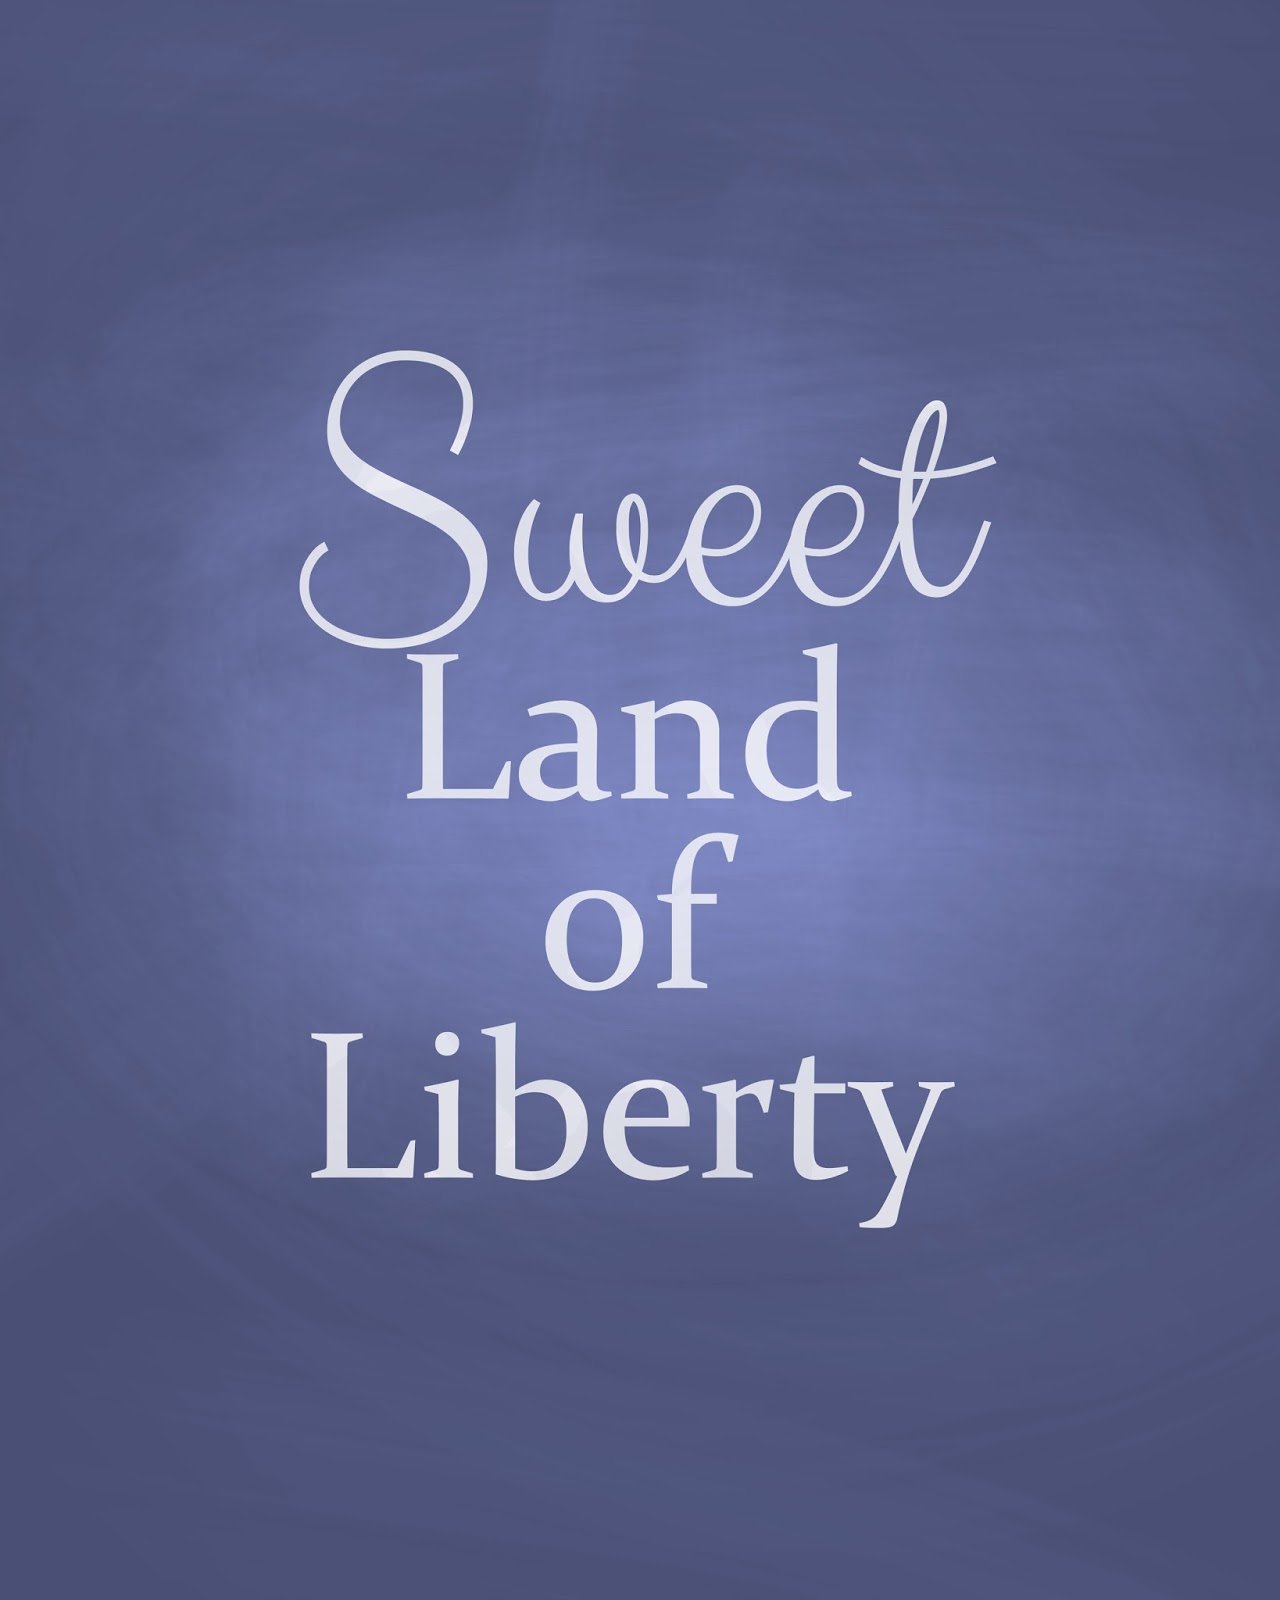 Sweet Land of Liberty - navy chalkboard printable - so cool!  Pinning for later!  #4thofjuly #patriotic #redwhiteblue